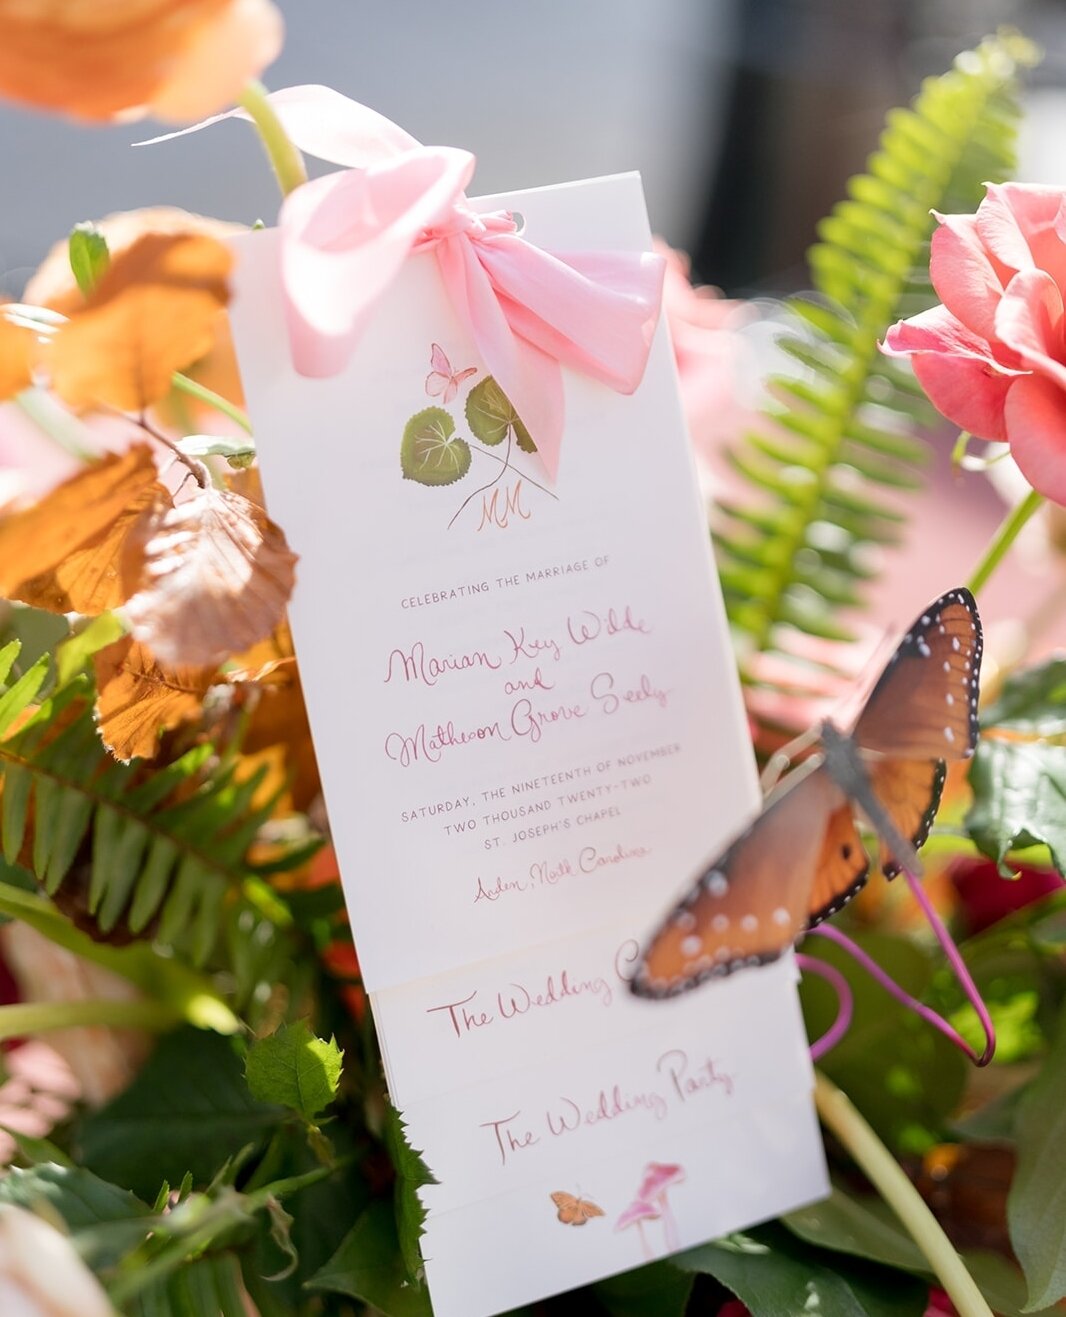 These butterfly accents have us all aflutter. ⁠
⁠
Planning and design: @hollowayevents ⁠
Photography: @Mollypeach⁠
Dress: @giambatistavalli⁠
Bride: @drawn.by.mimi⁠
Stationery:⁠ @julieking⁠
Floral Design: @floressenceflowers 
⁠
#weddingday #weddingins